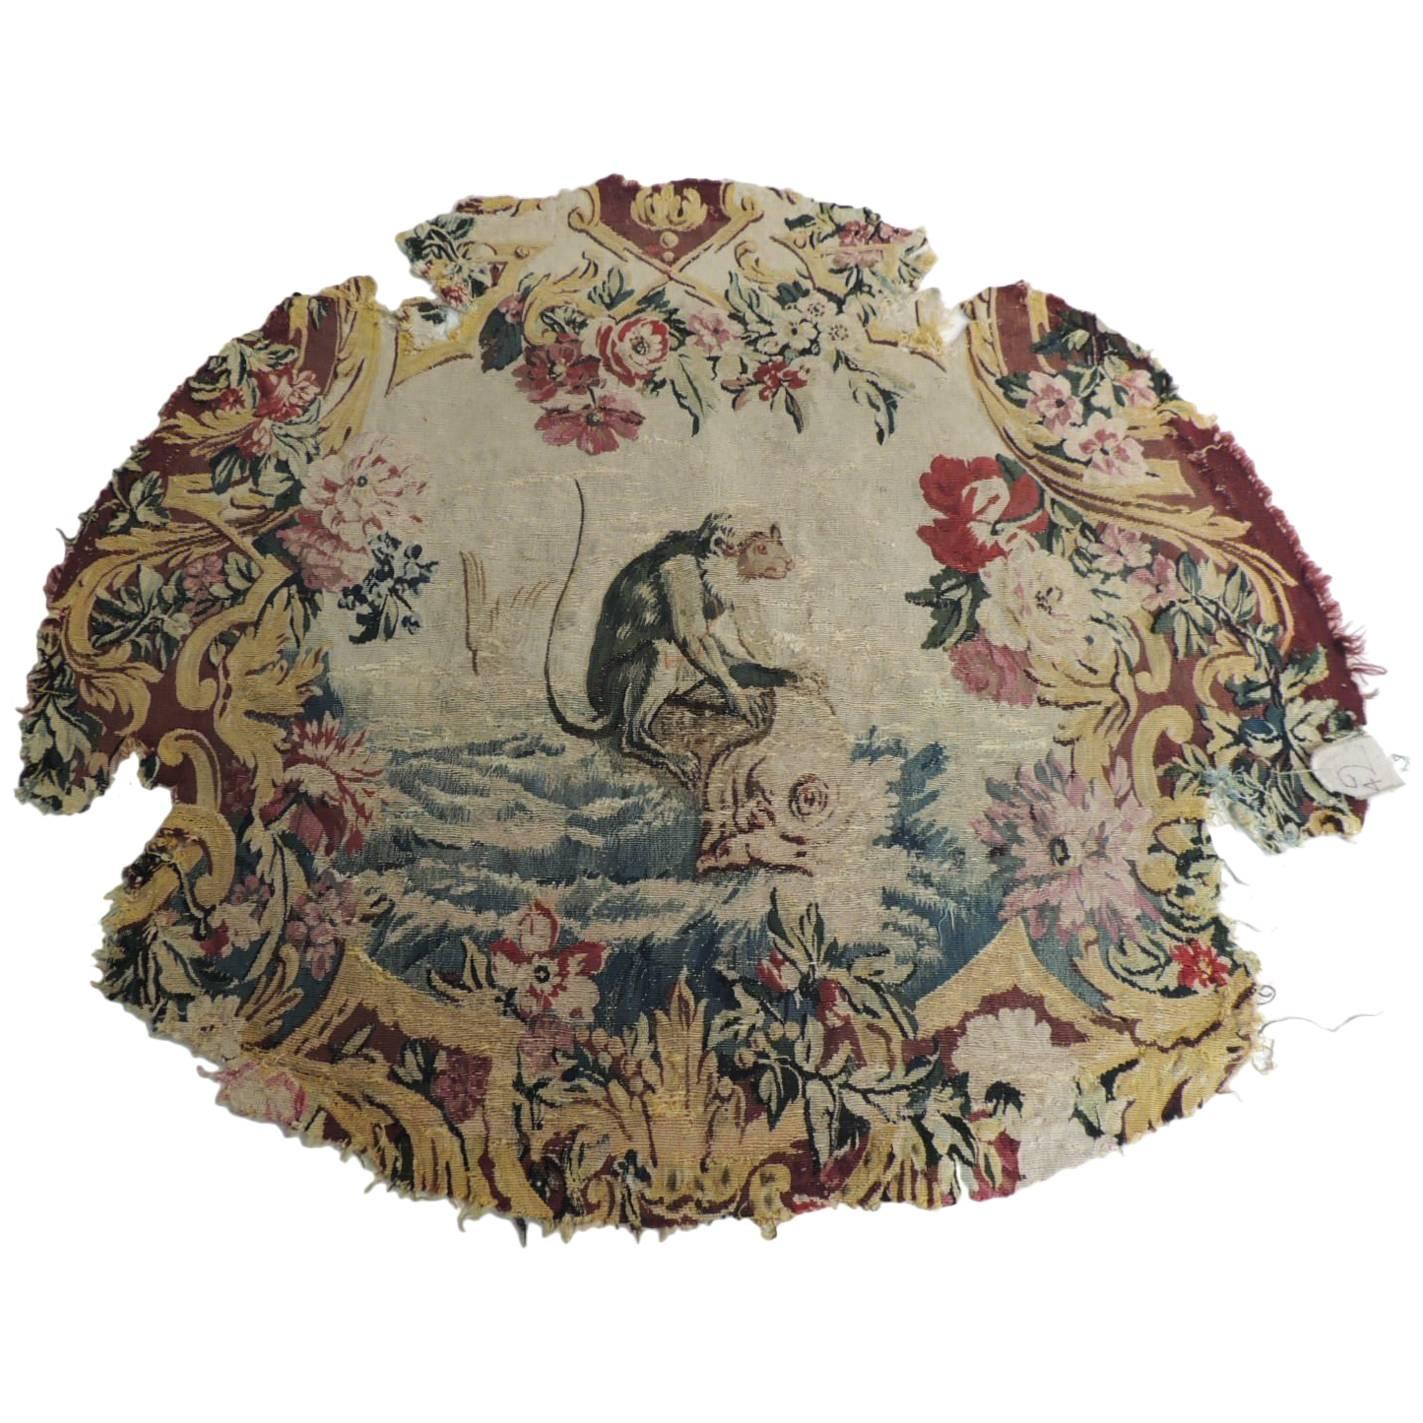 19th C.Aubusson Tapestry Chair Seat Cover Depicting a Monkey